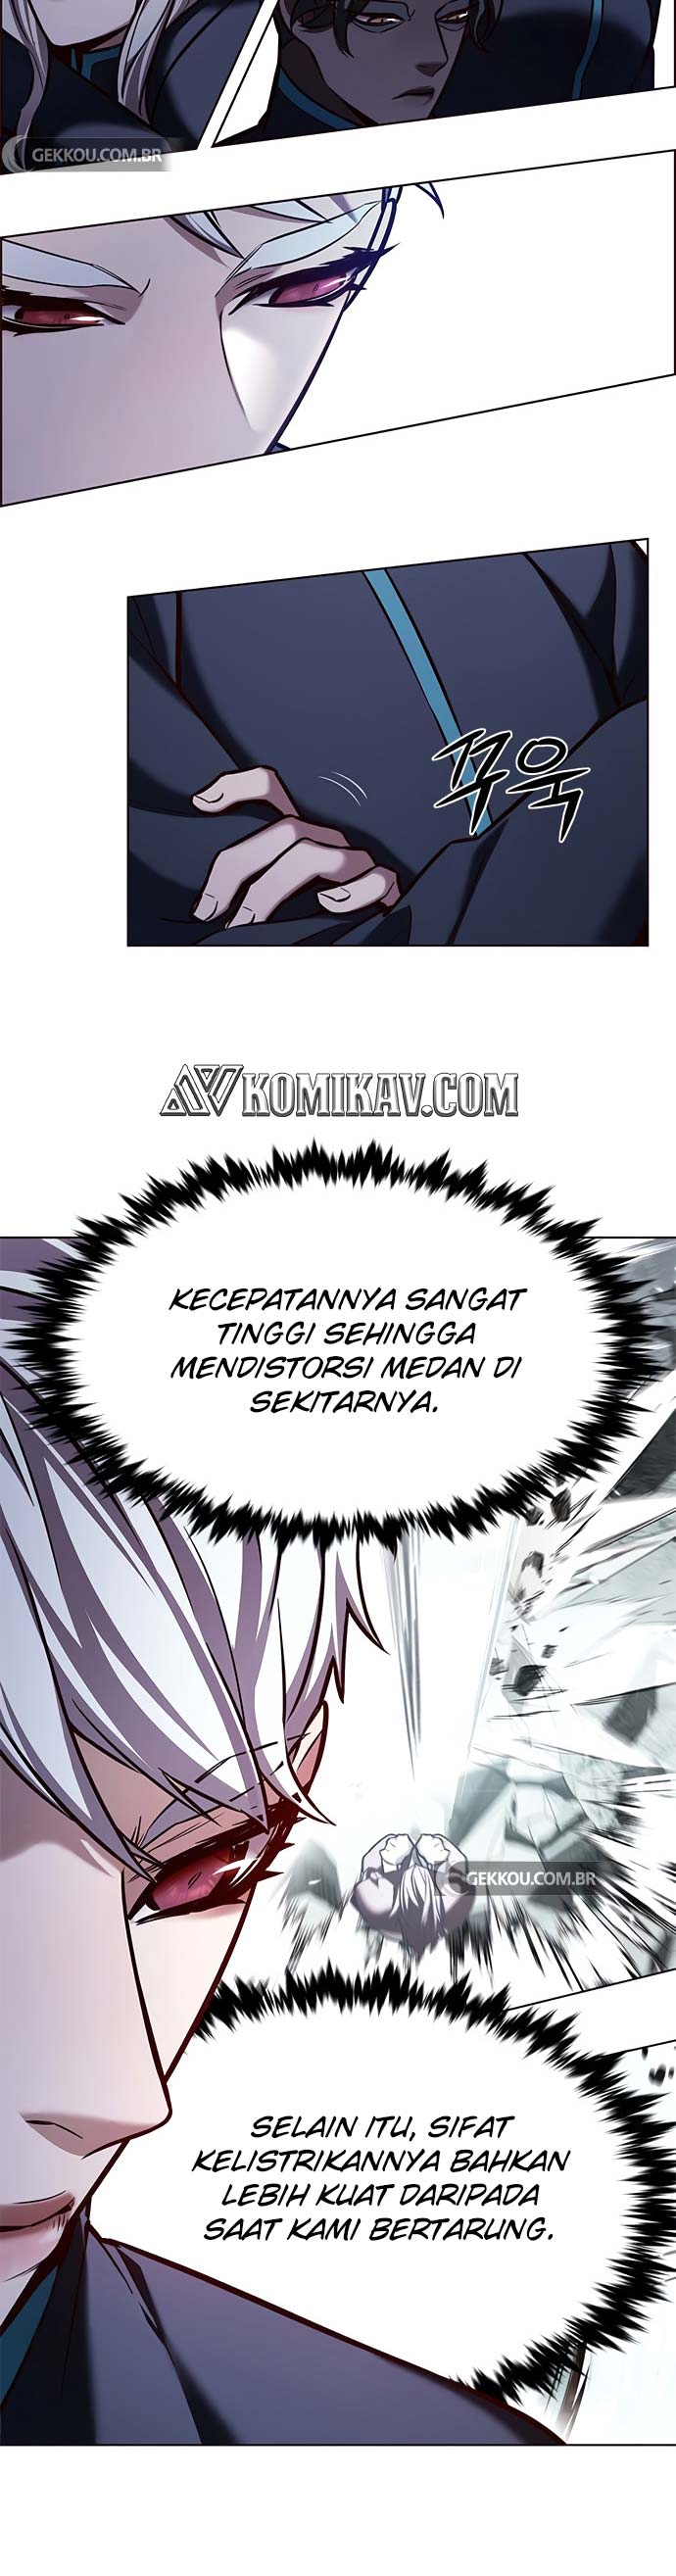 Eleceed Chapter 199